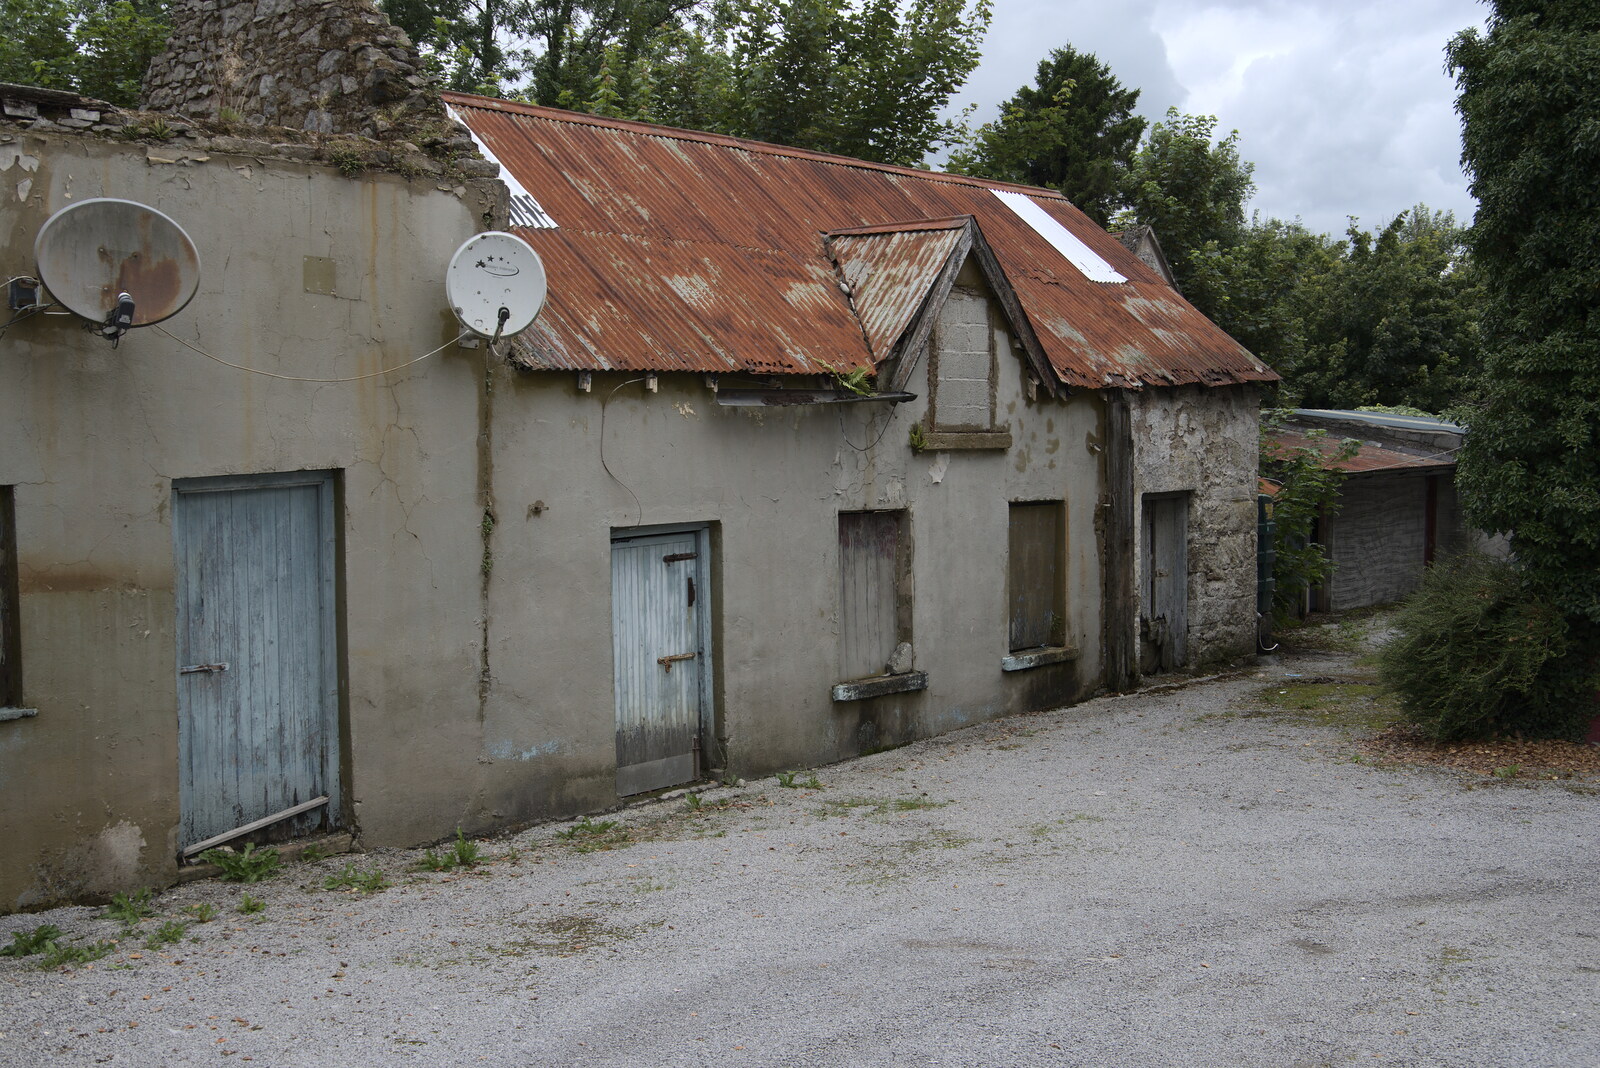 A Trip to Manorhamilton, County Leitrim, Ireland - 11th August 2021: Derelict house on New Line